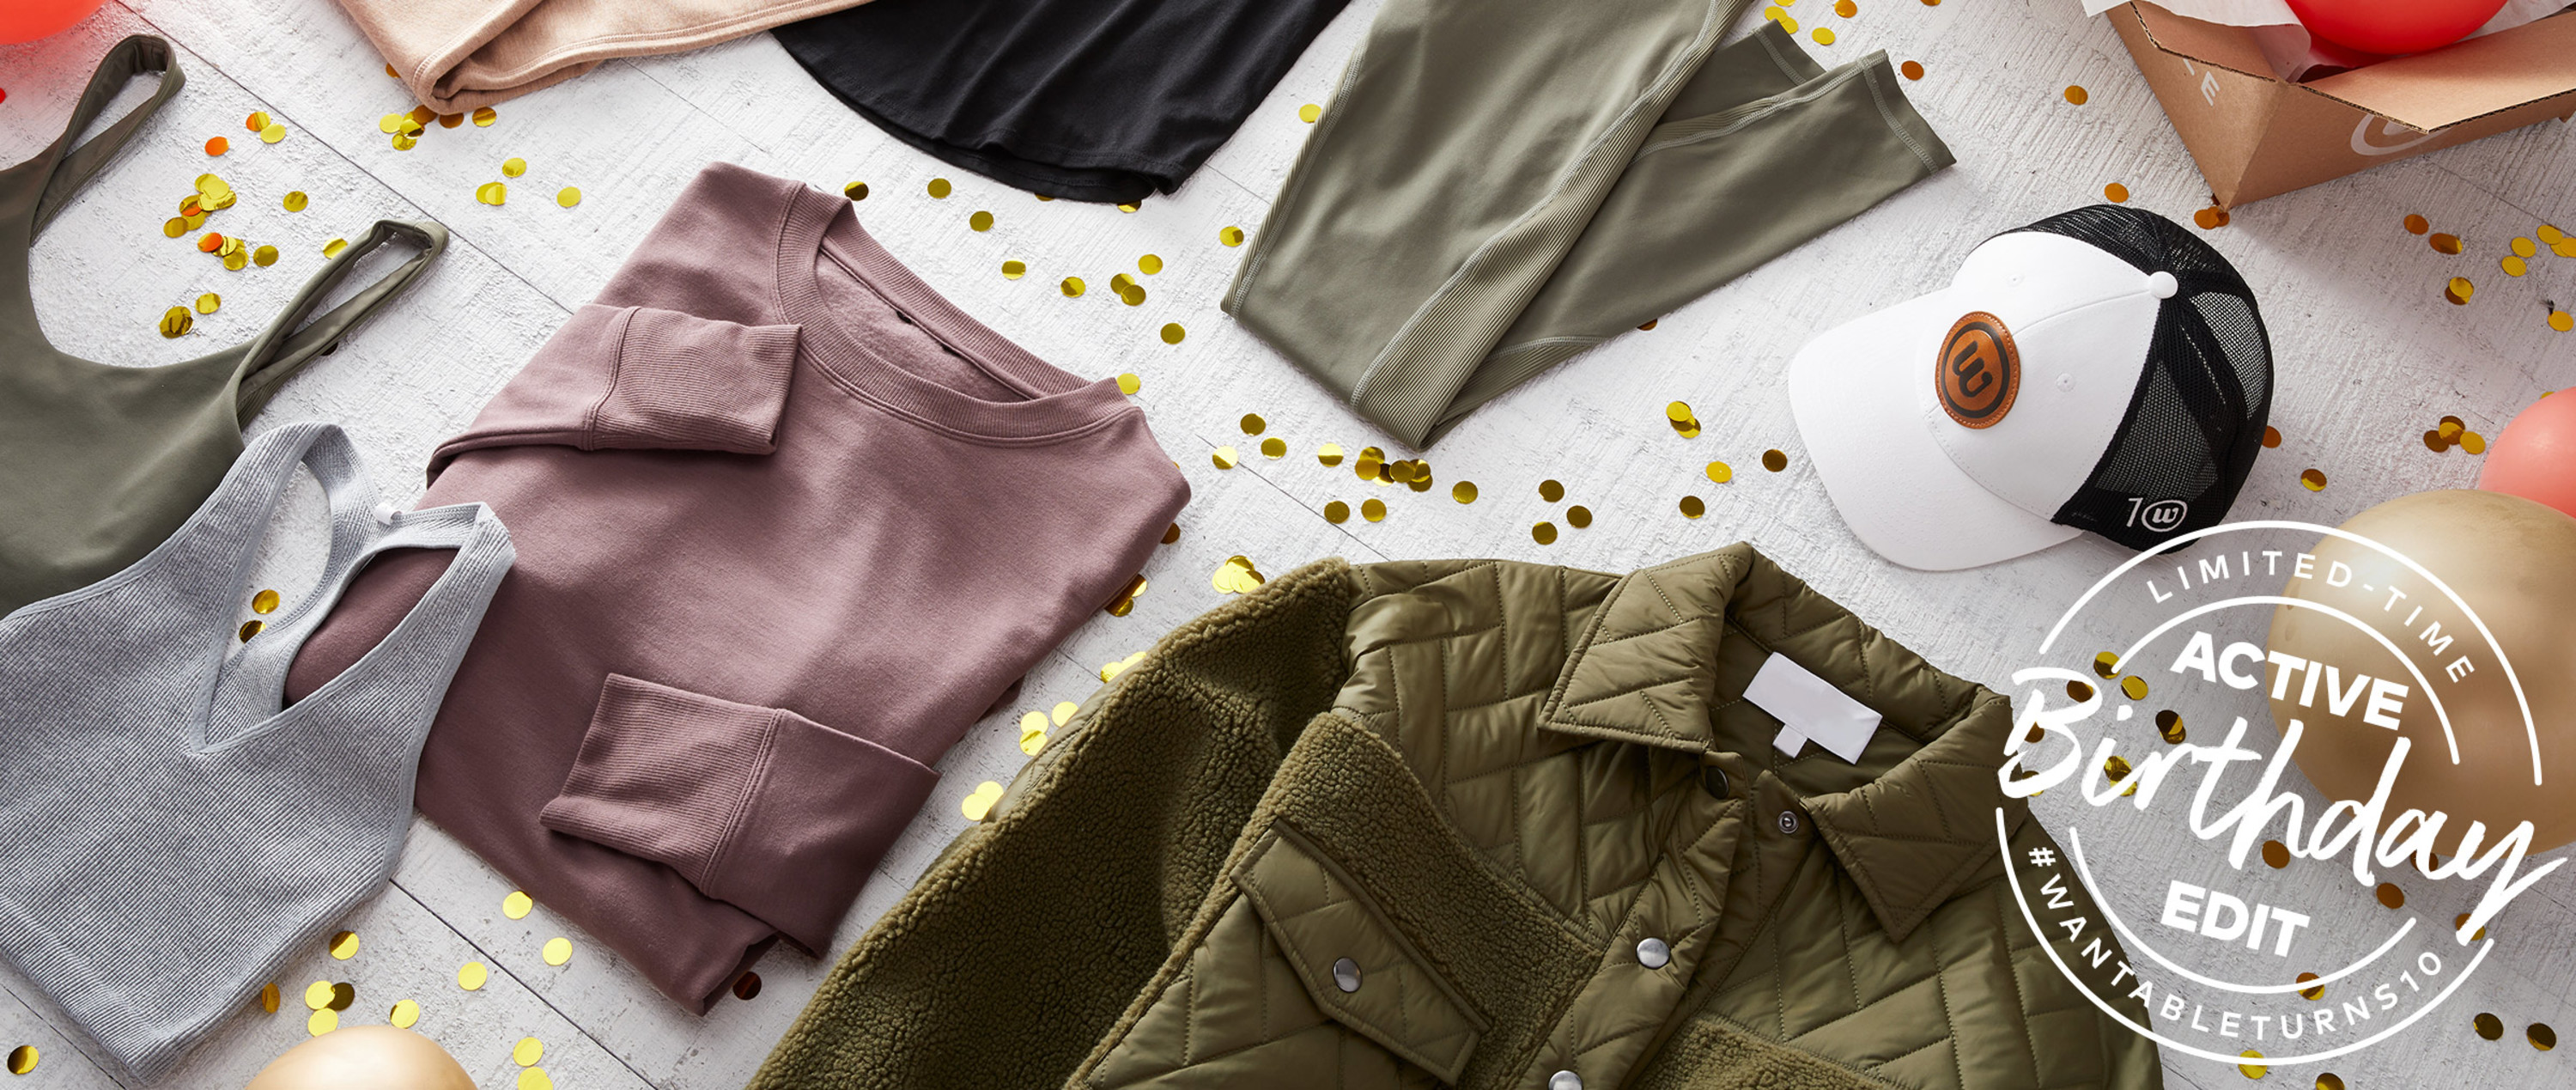 Your expert personal stylist is ready to roll:
get 7 studio-to-street active & athleisure styles 
including 1 of 2 limited-edition birthday tanks.